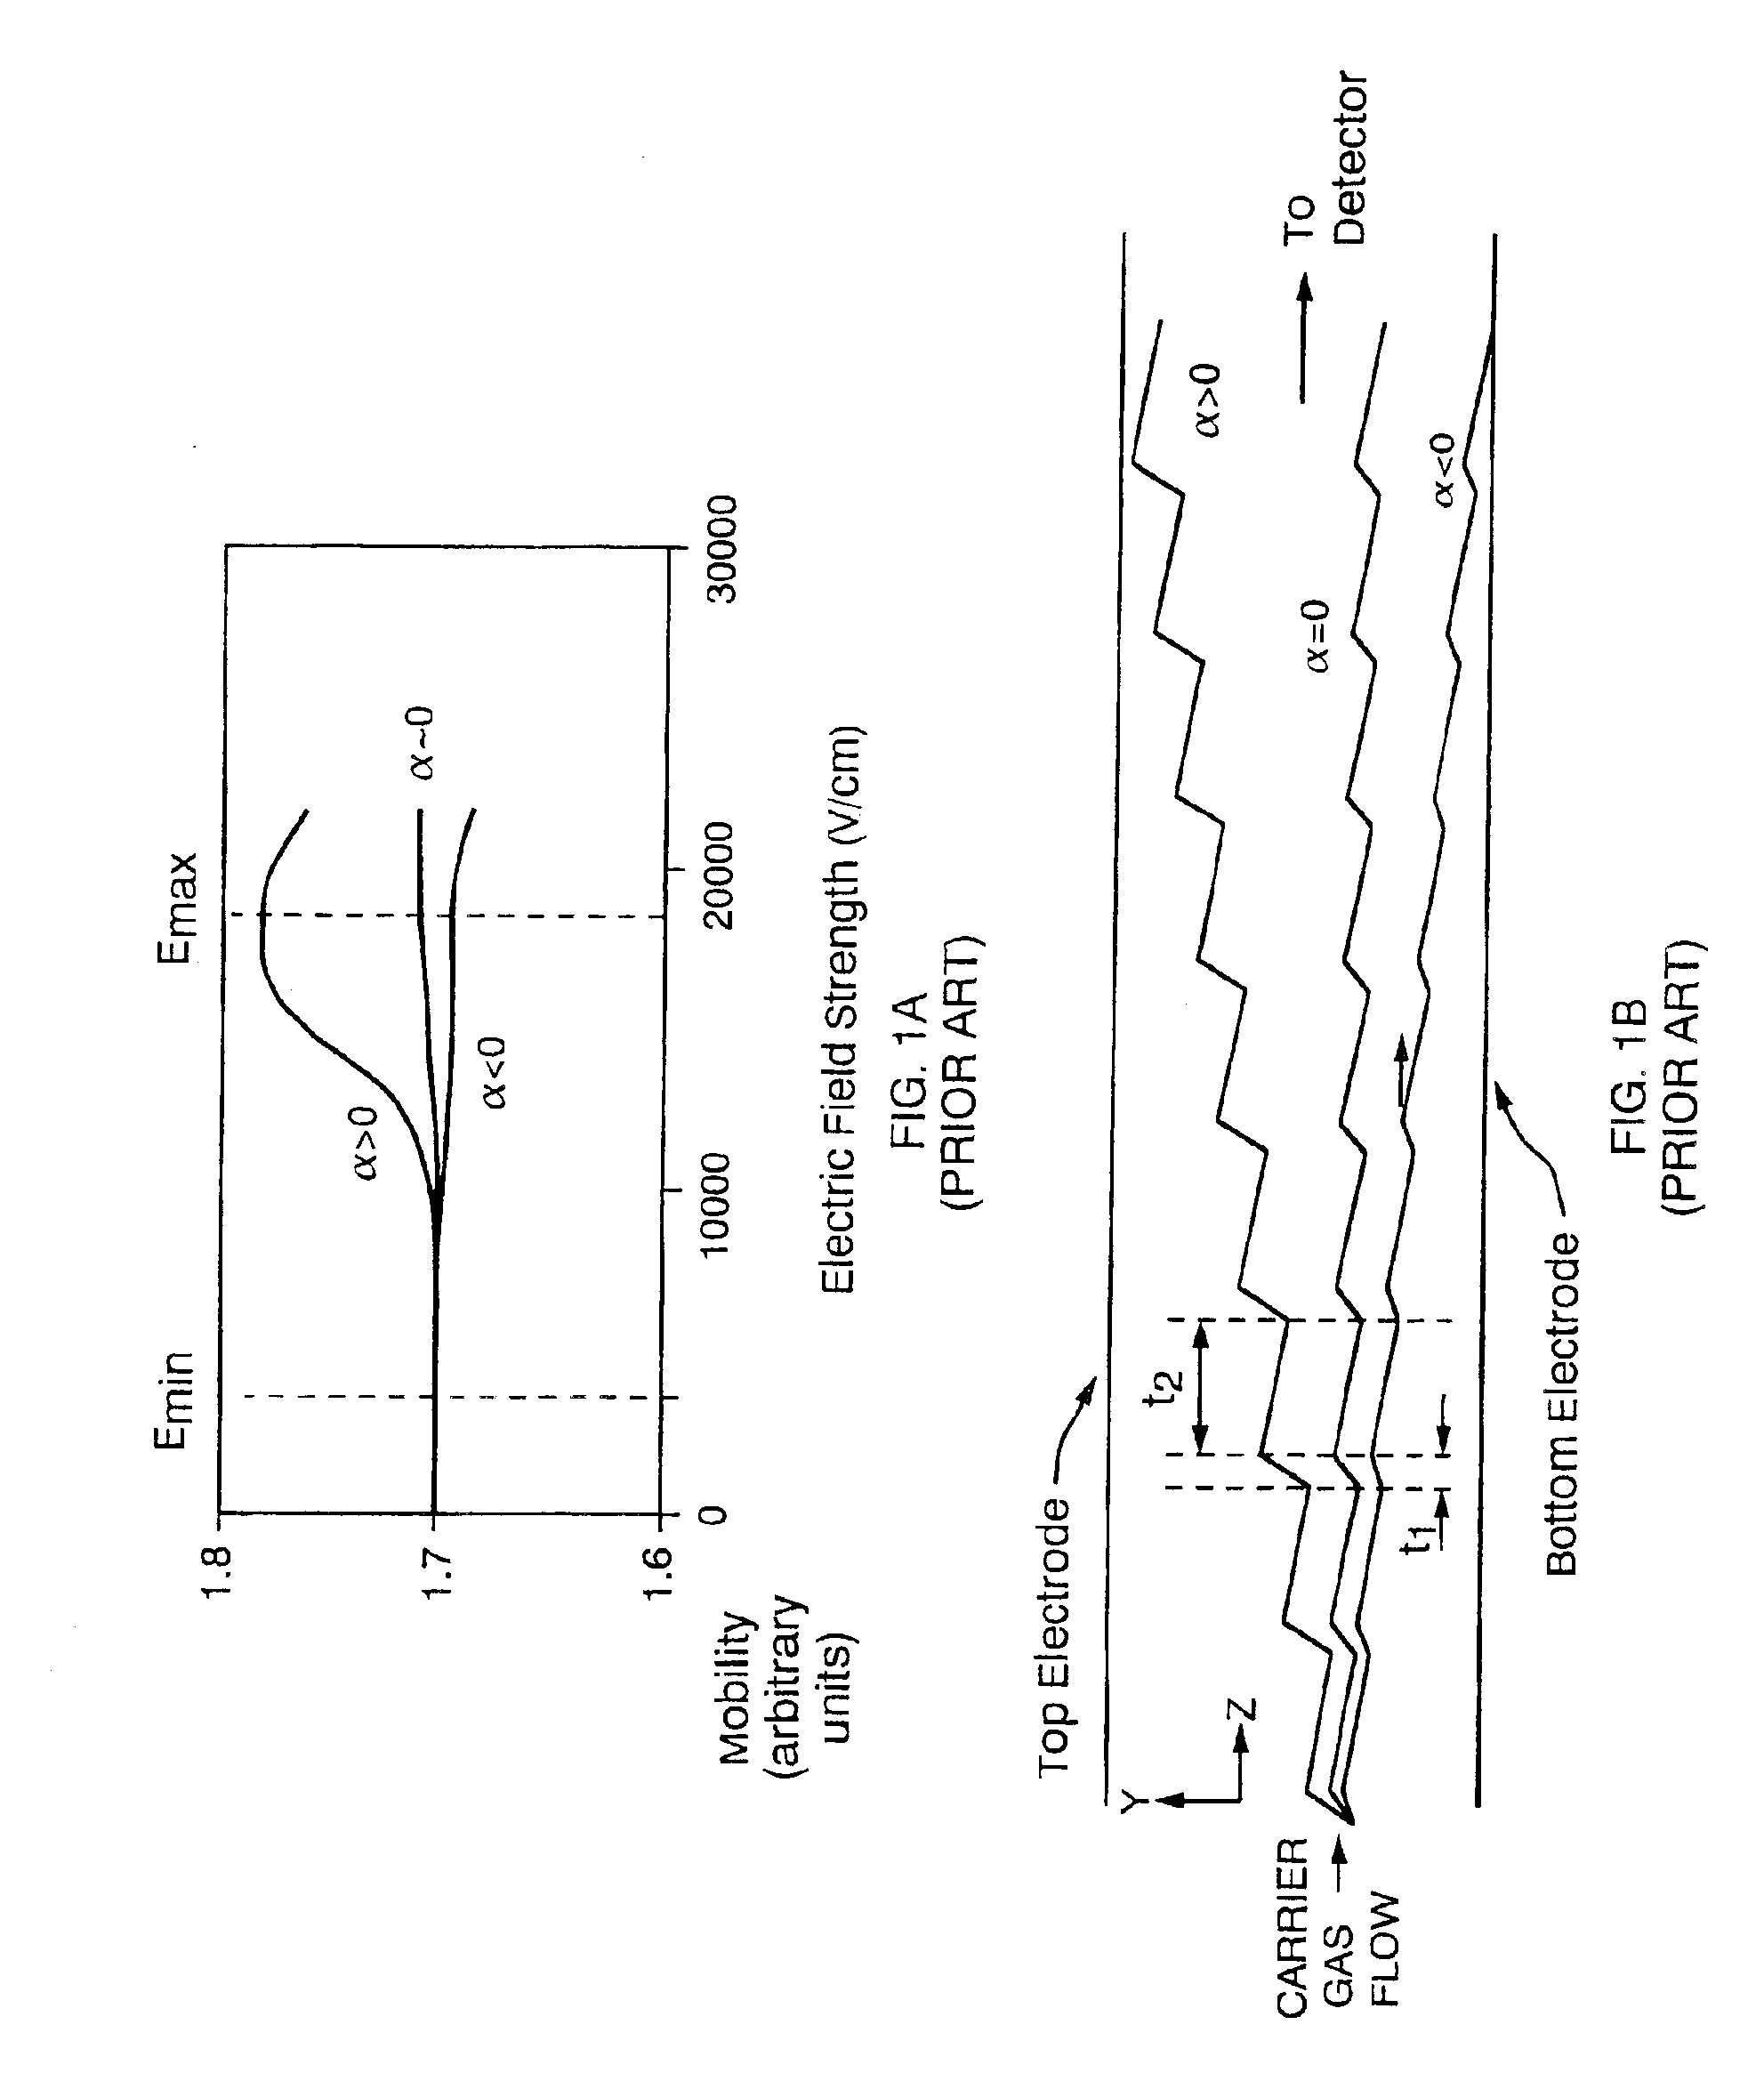 Method and apparatus for electrospray augmented high field asymmetric ion mobility spectrometry